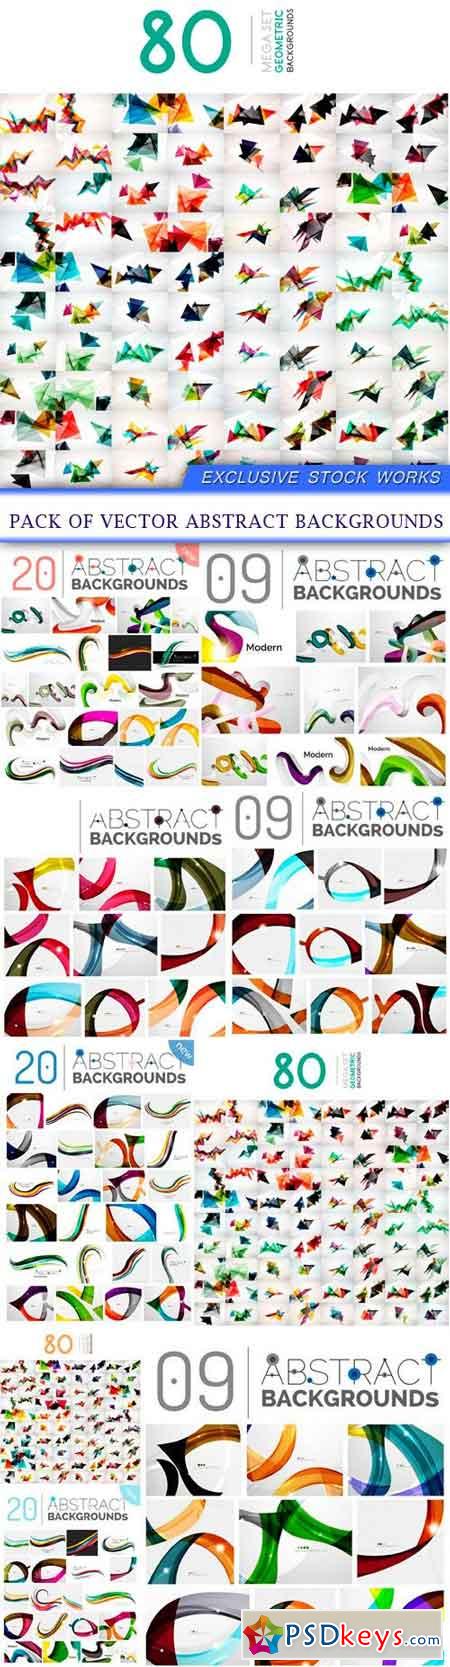 Pack of vector abstract backgrounds 9X EPS